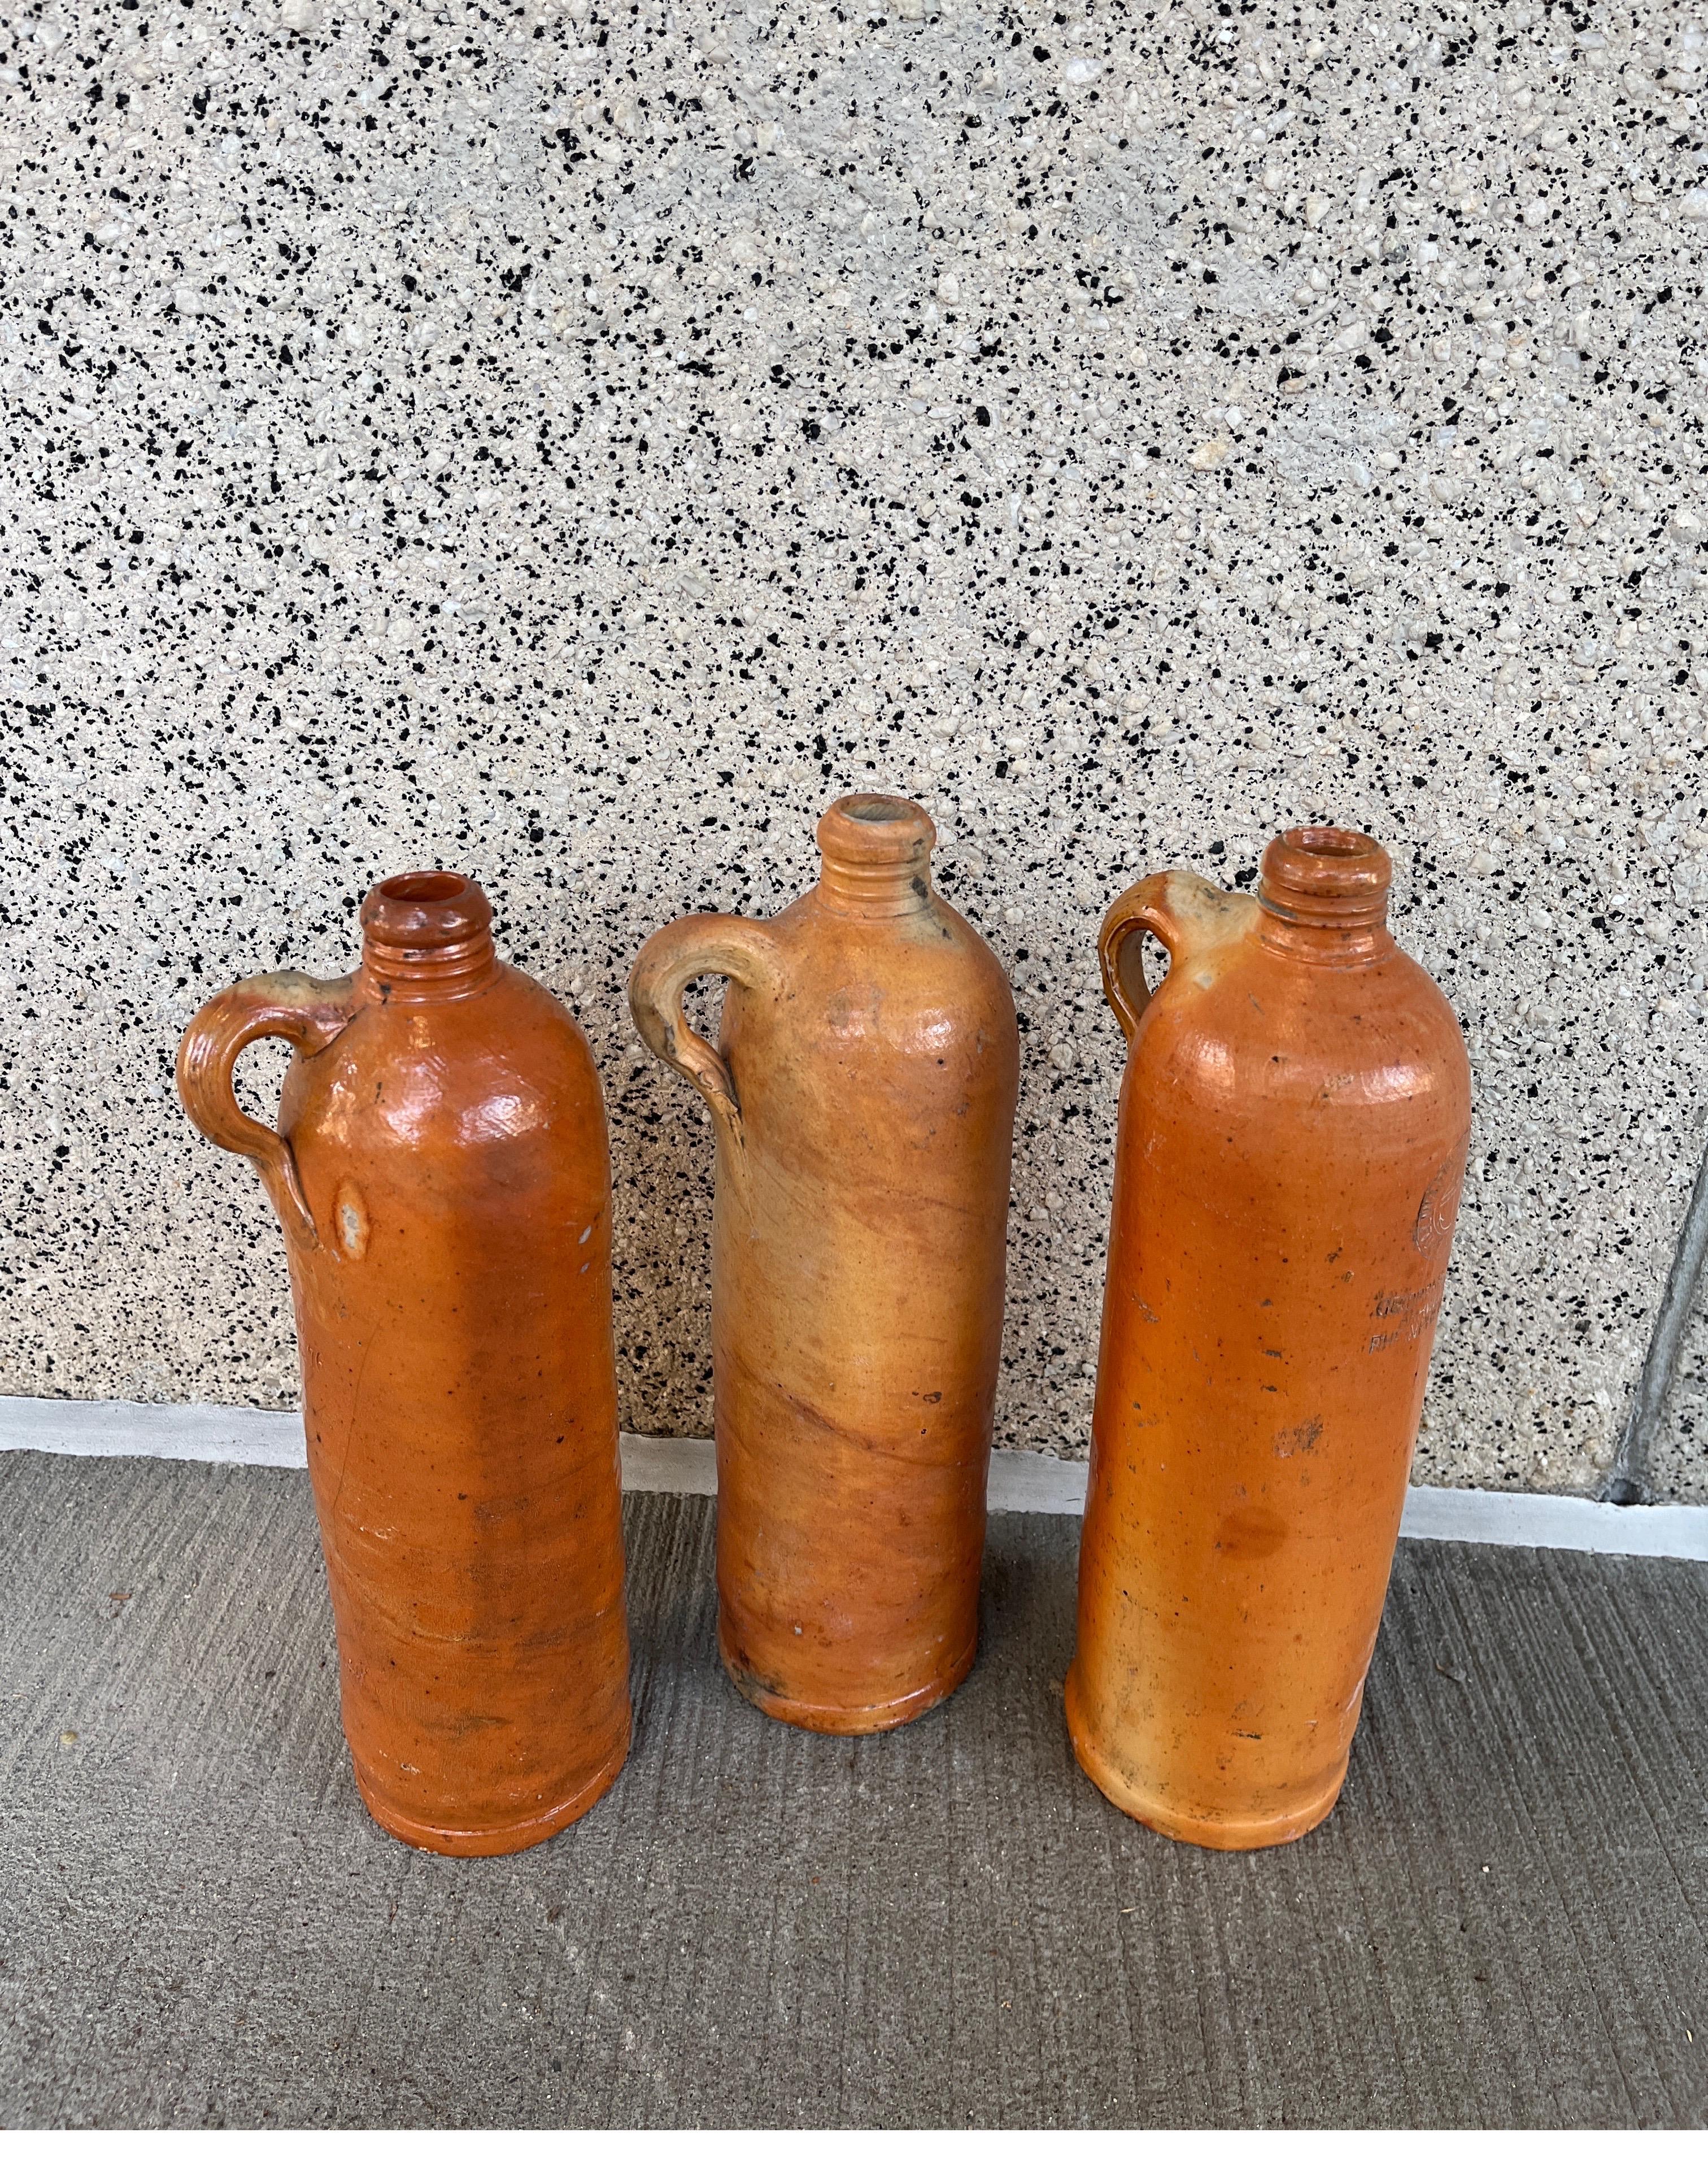 A set of three antique stoneware gin bottles from Germany. Each one has the impressed name of the maker. Gracefully shaped, with small thumb handles, these tall jars originally contained gin or other alcoholic beverages. Their soft colors,